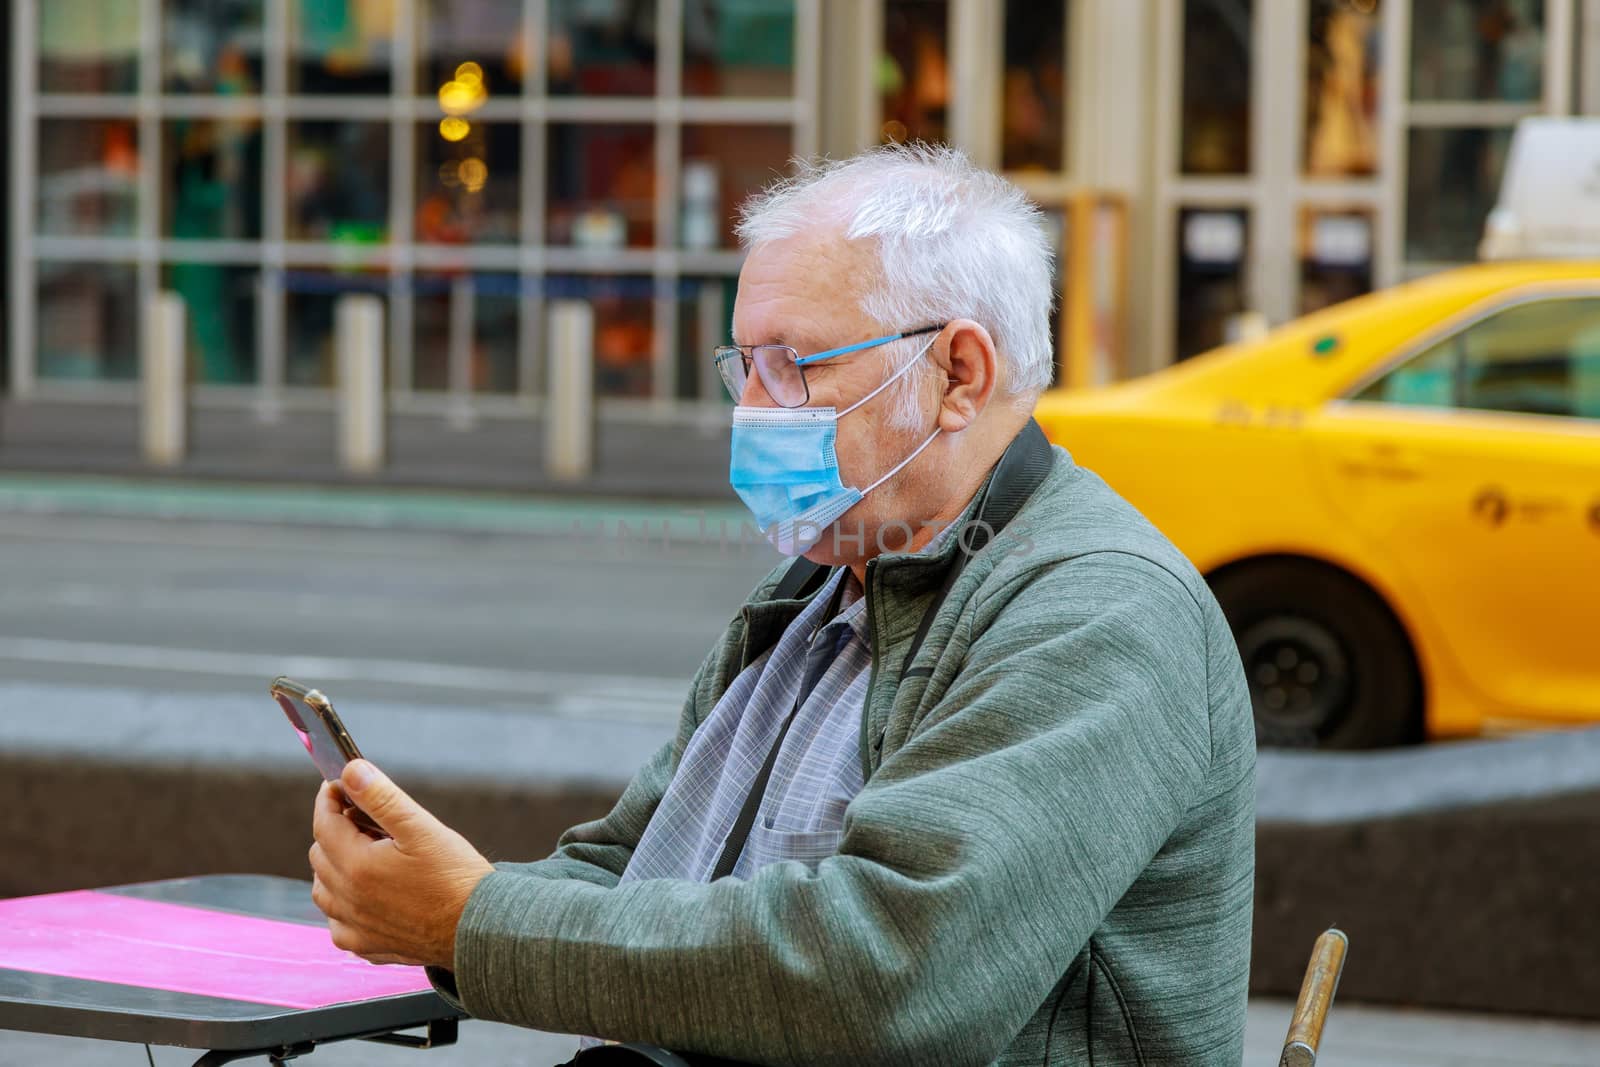 Old man using his mobile phone while walking down the street mask to protect from the coronavirus during the pandemic traveling New York USA